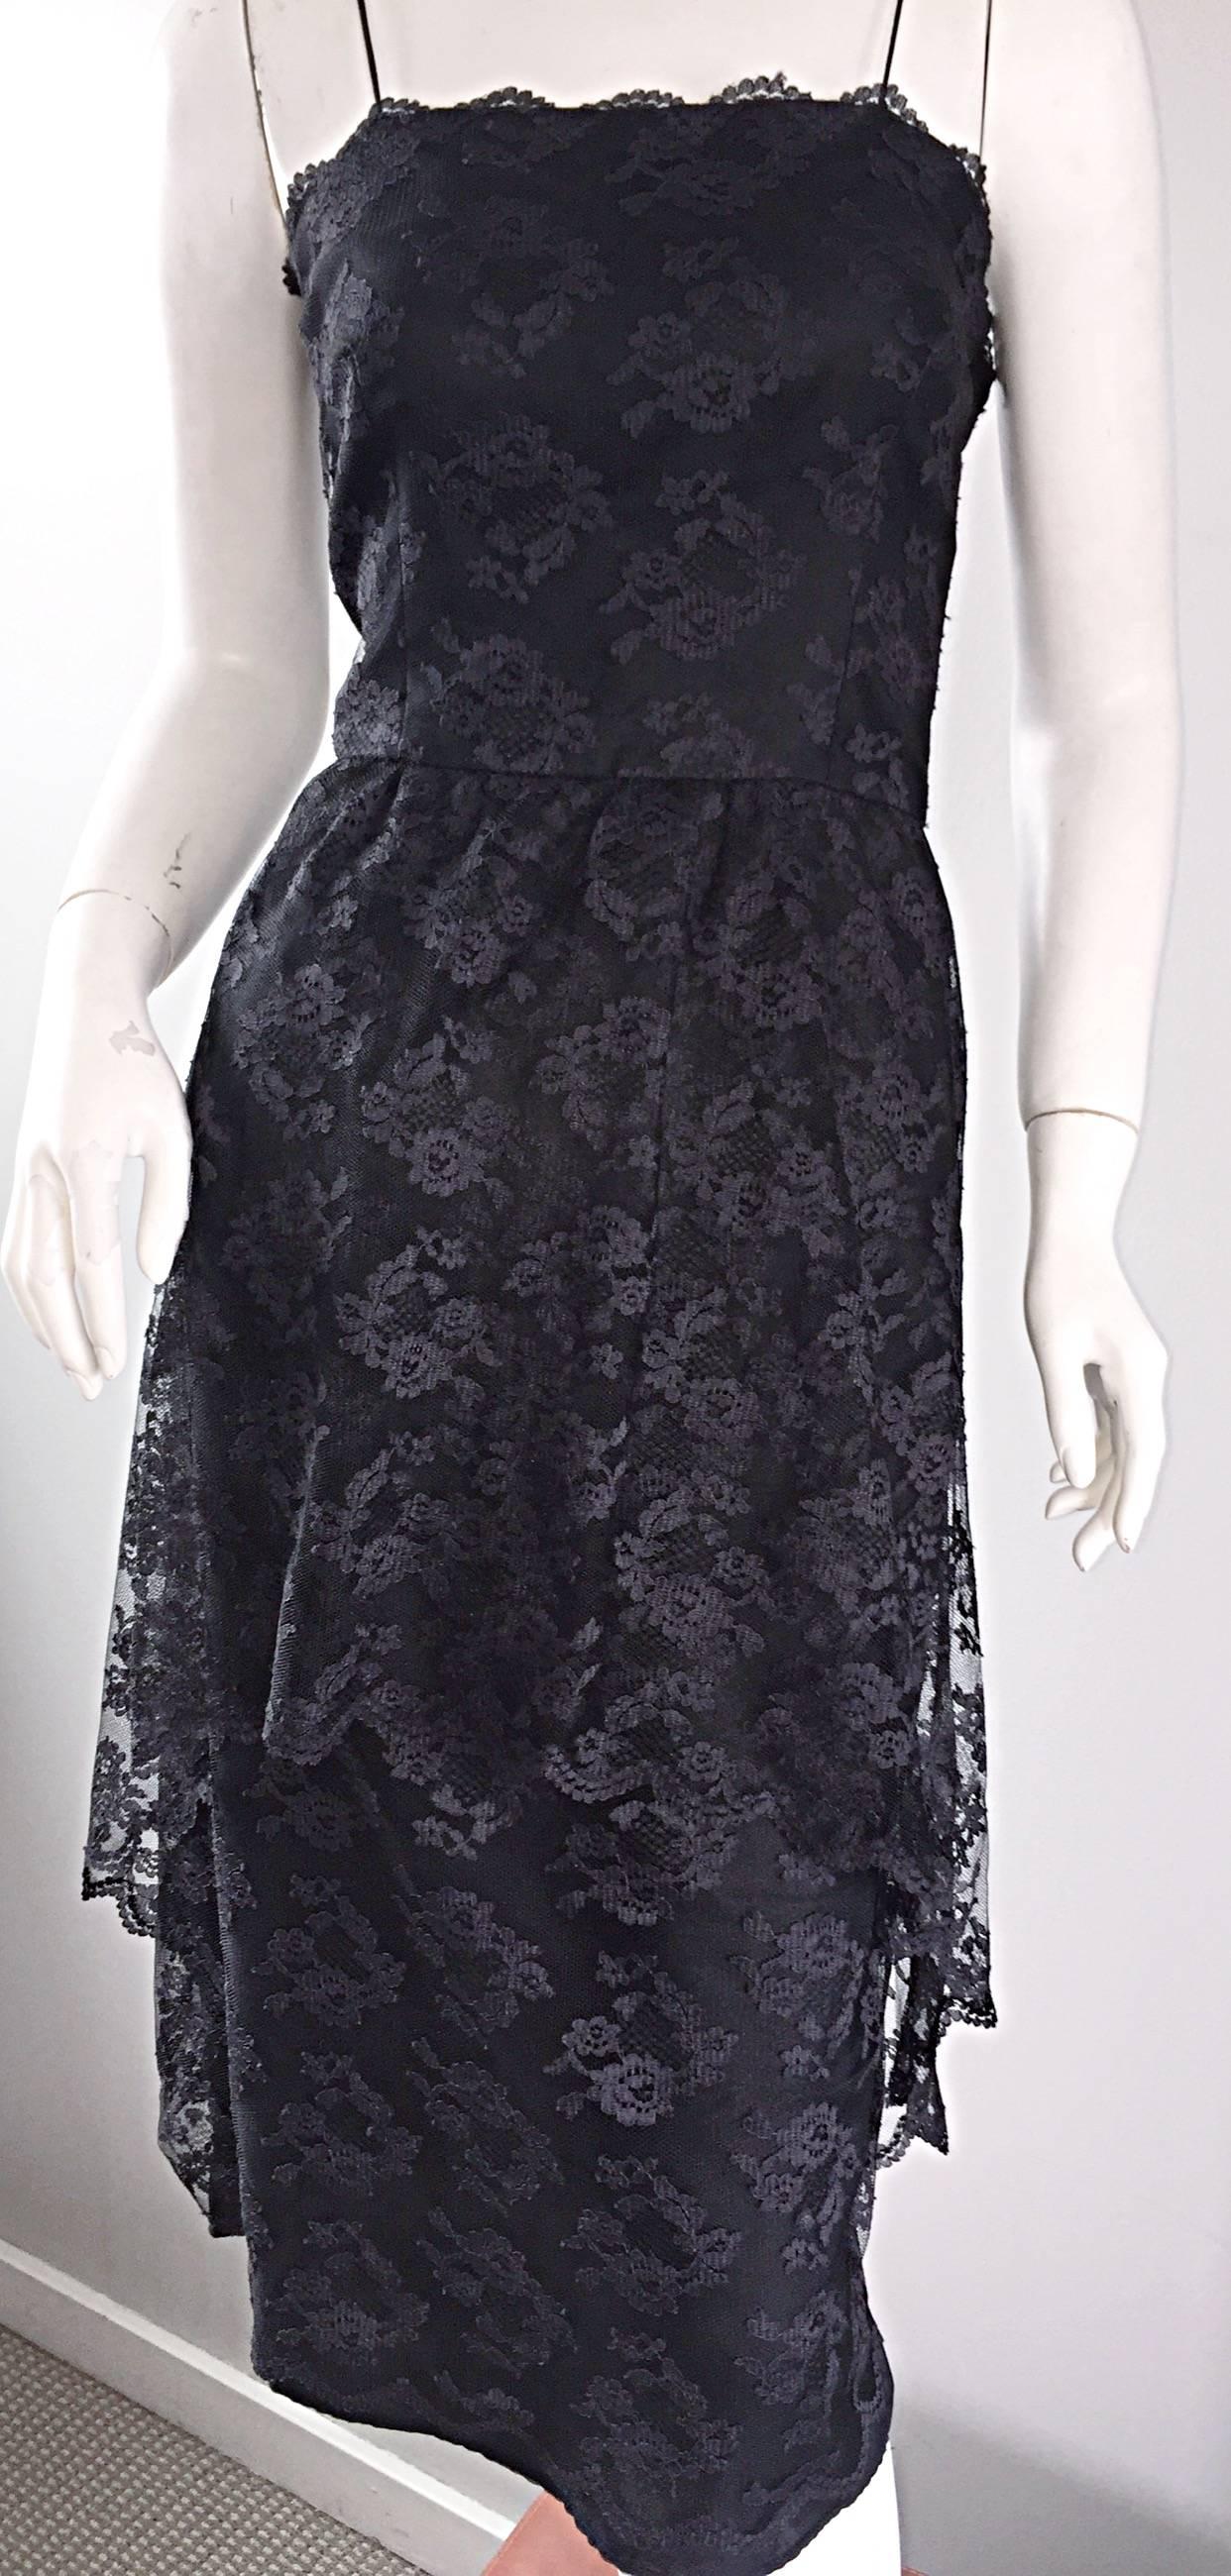 1960s Mollie Parnis Black Silk Chantilly Lace Dipped Hem Vintage Dress w/ Train  In Excellent Condition For Sale In San Diego, CA